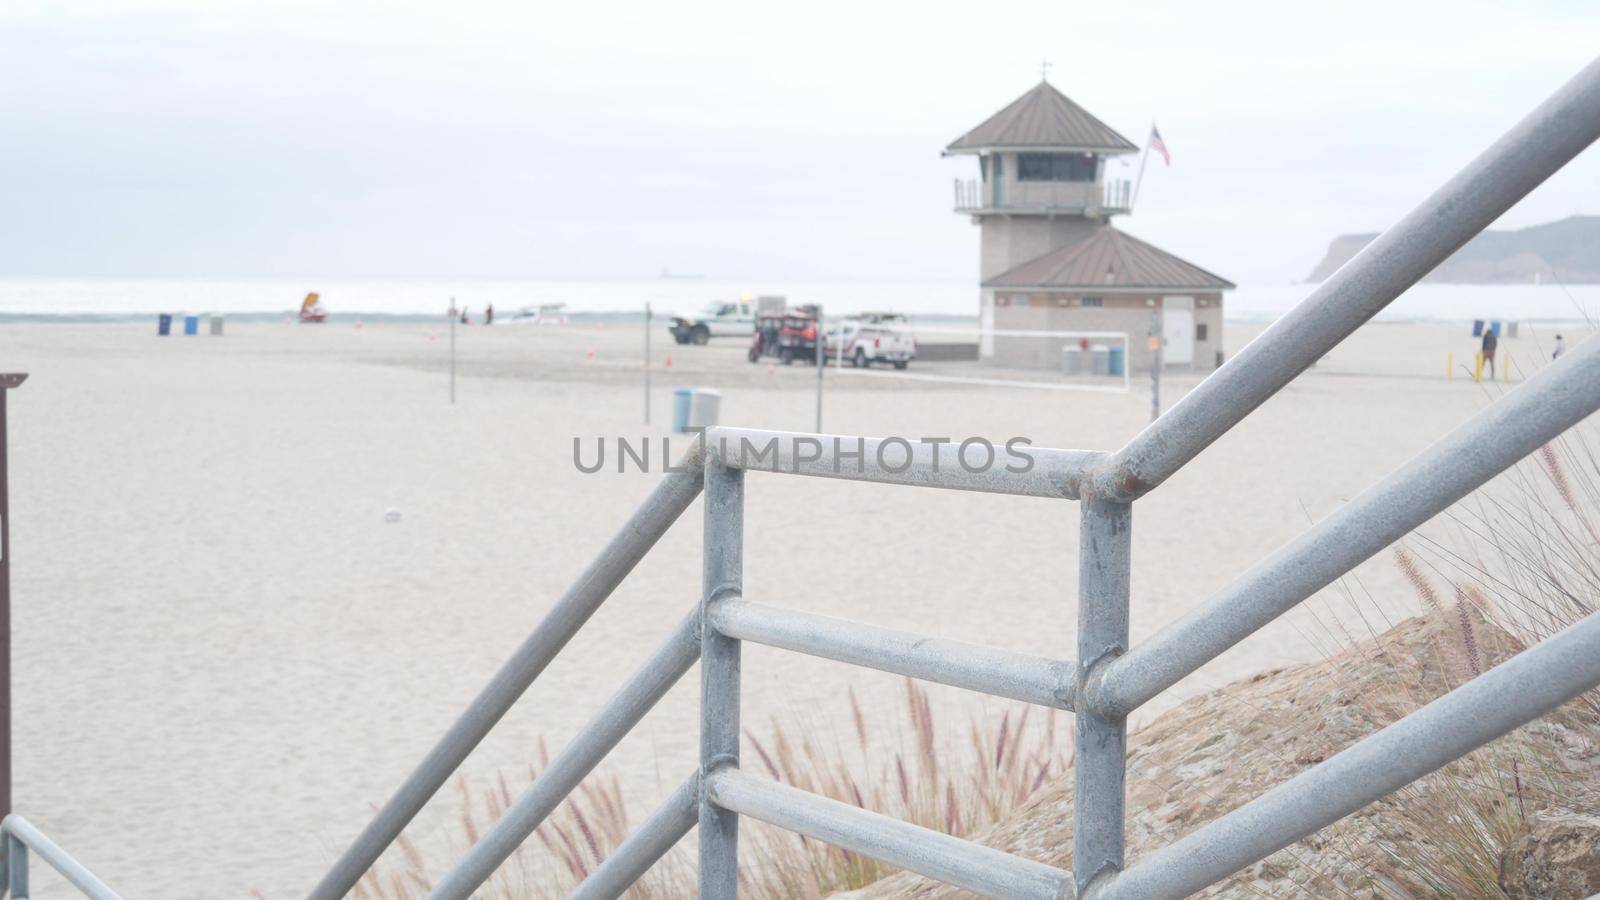 Lifeguard stand or life guard tower hut, surfing safety on California beach, USA. Rescue station, coast lifesavers wachtower or house, Coronado ocean beach, San Diego. Beach access stairs or steps.